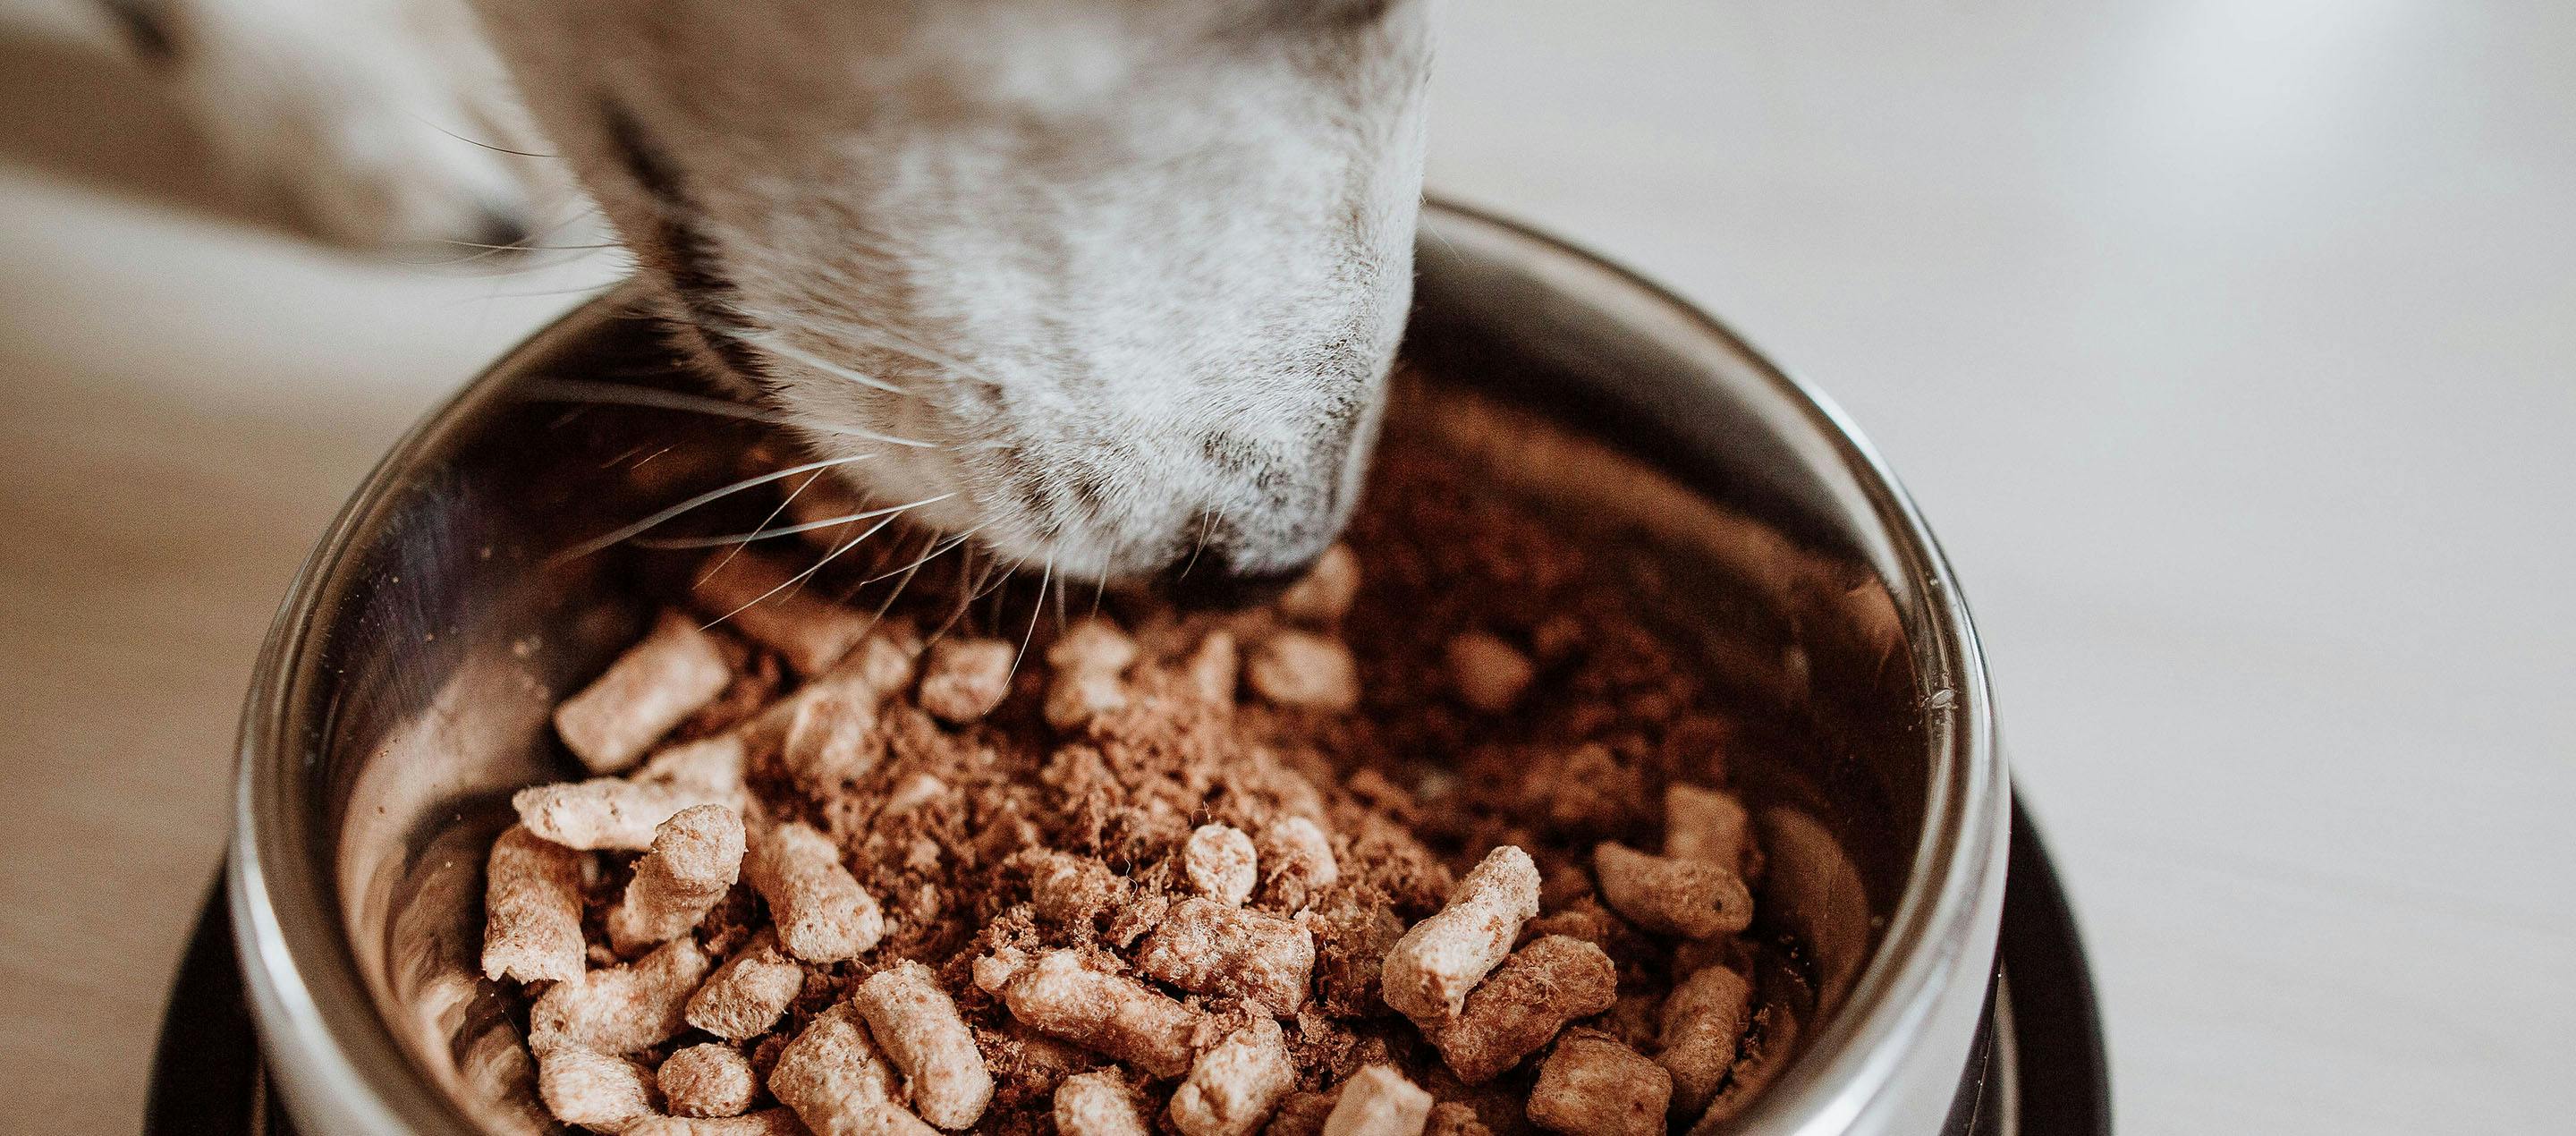 Mix it Up: A Guide to Nutritious and Delicious Pet Meal Mix-Ins for a Balanced Diet